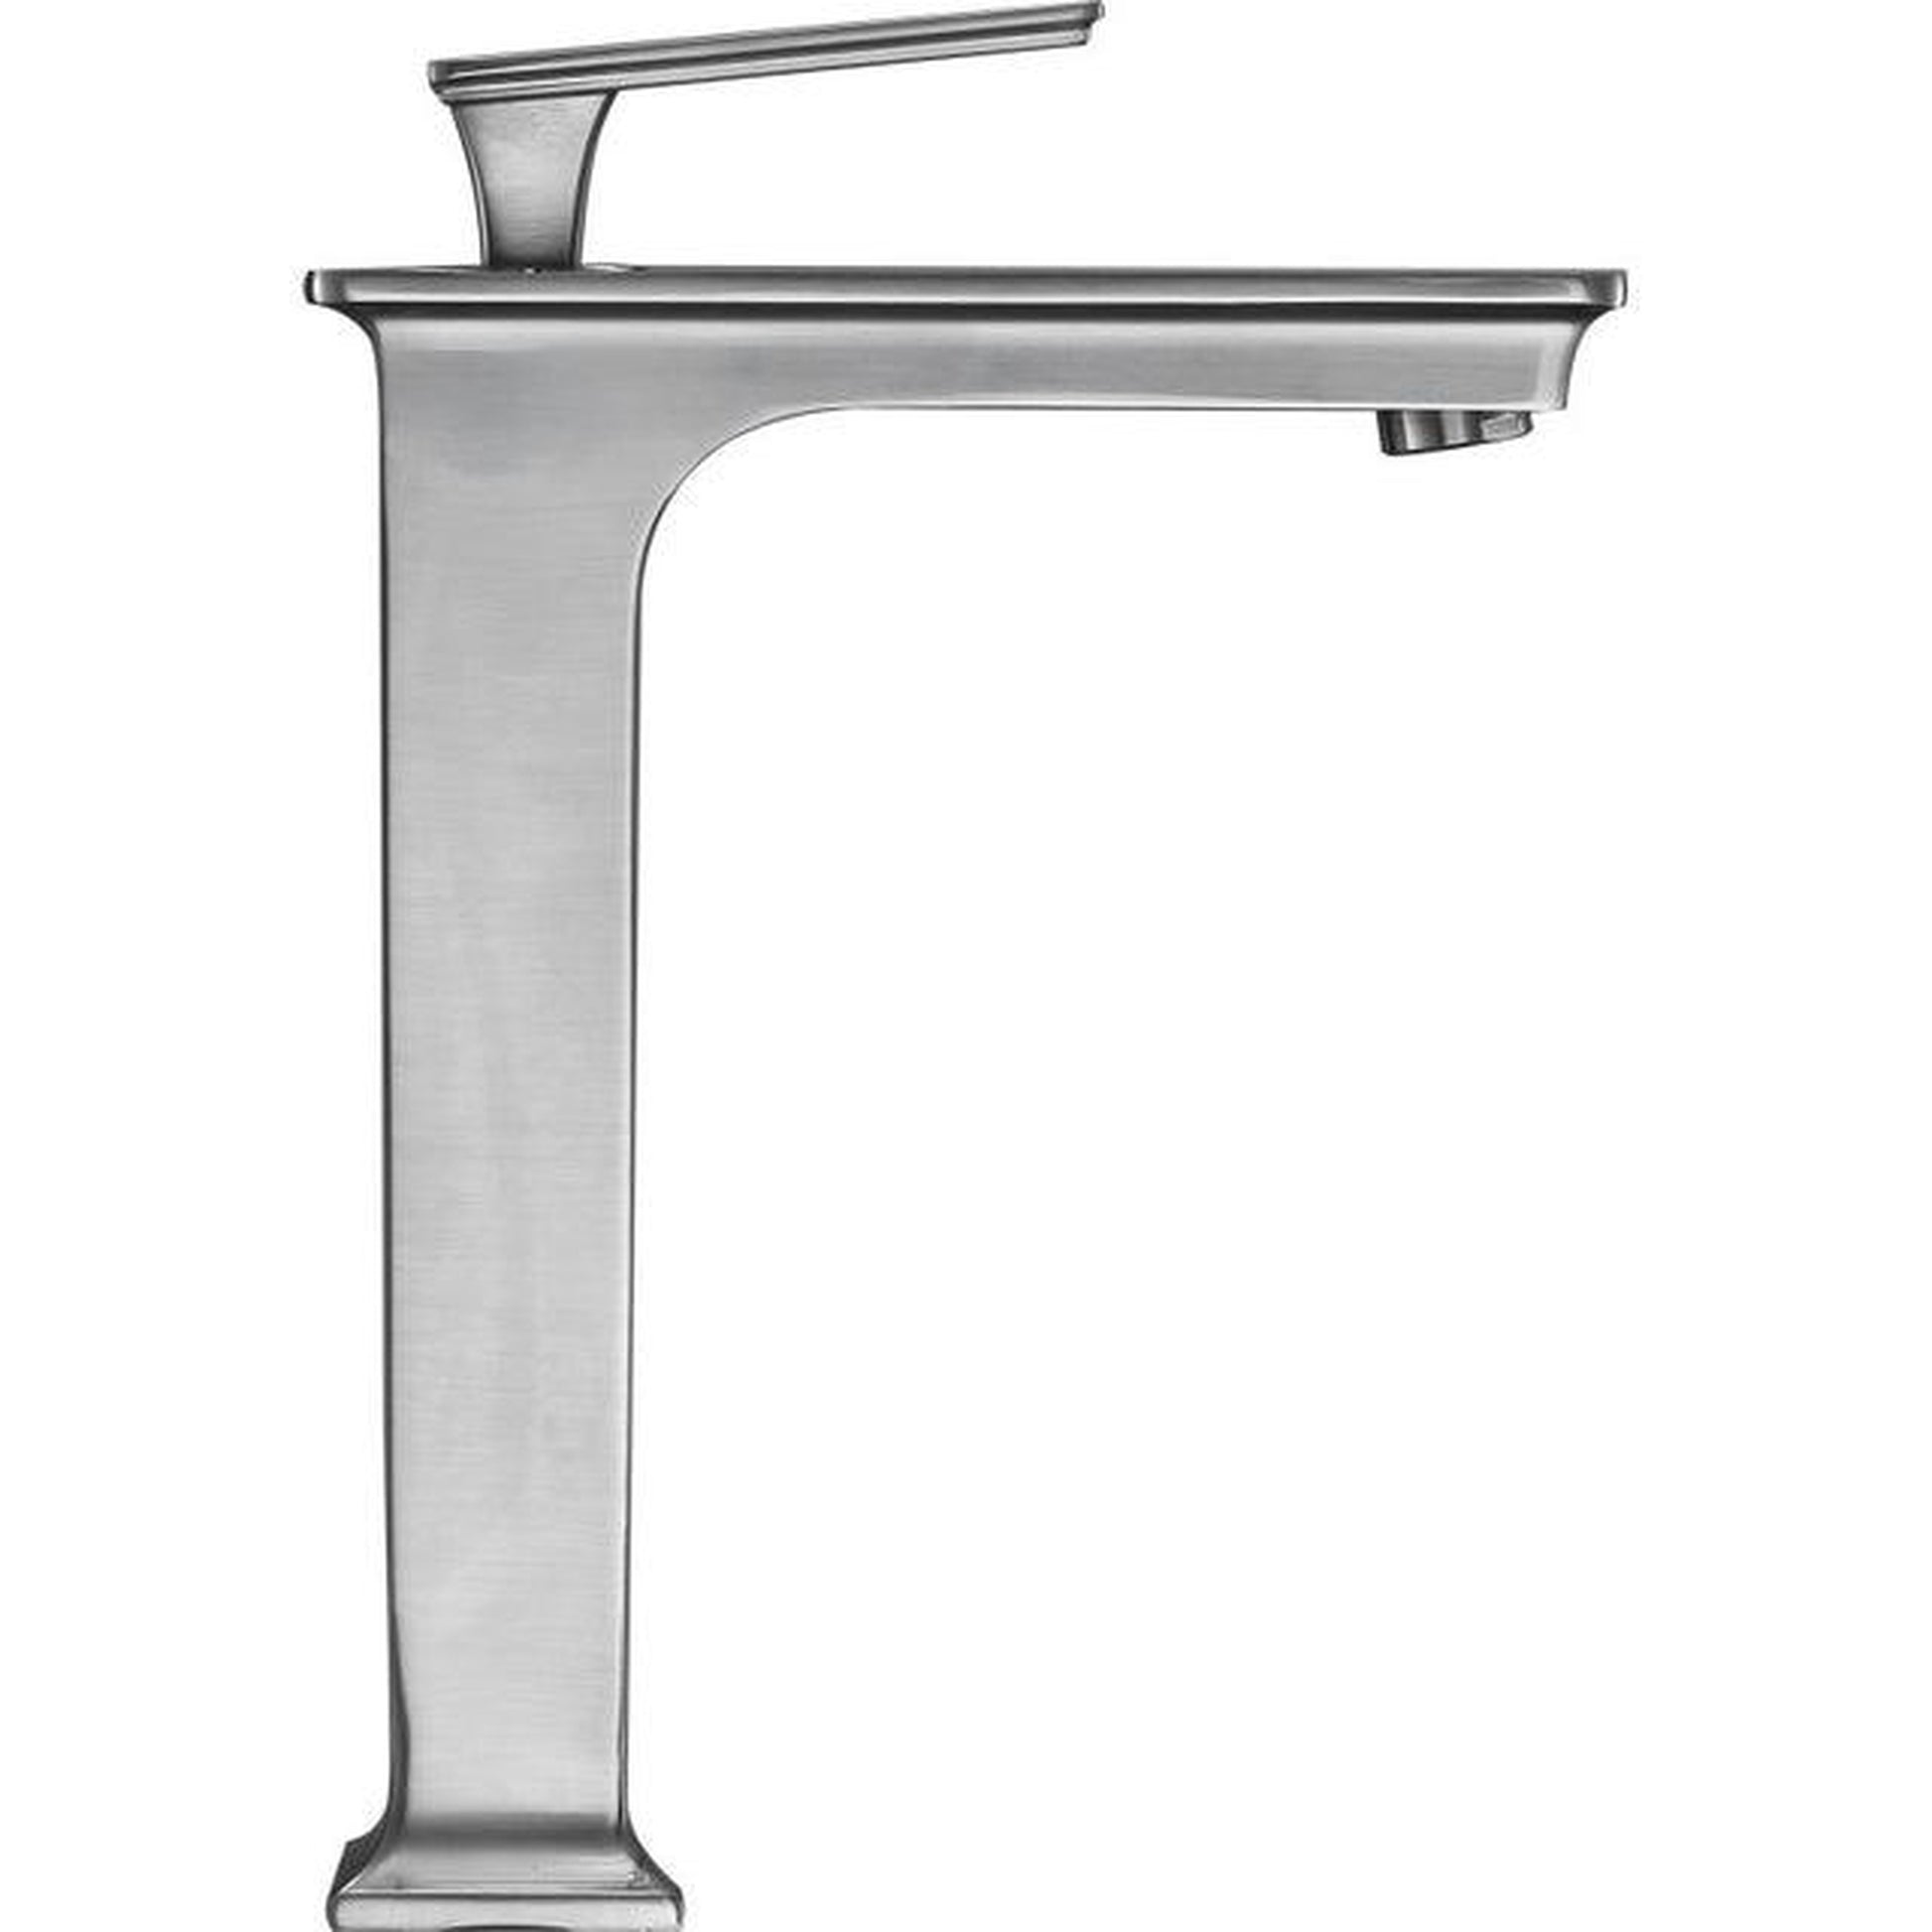 ANZZI Saunter Series 9" Single Hole Brushed Nickel Bathroom Sink Faucet